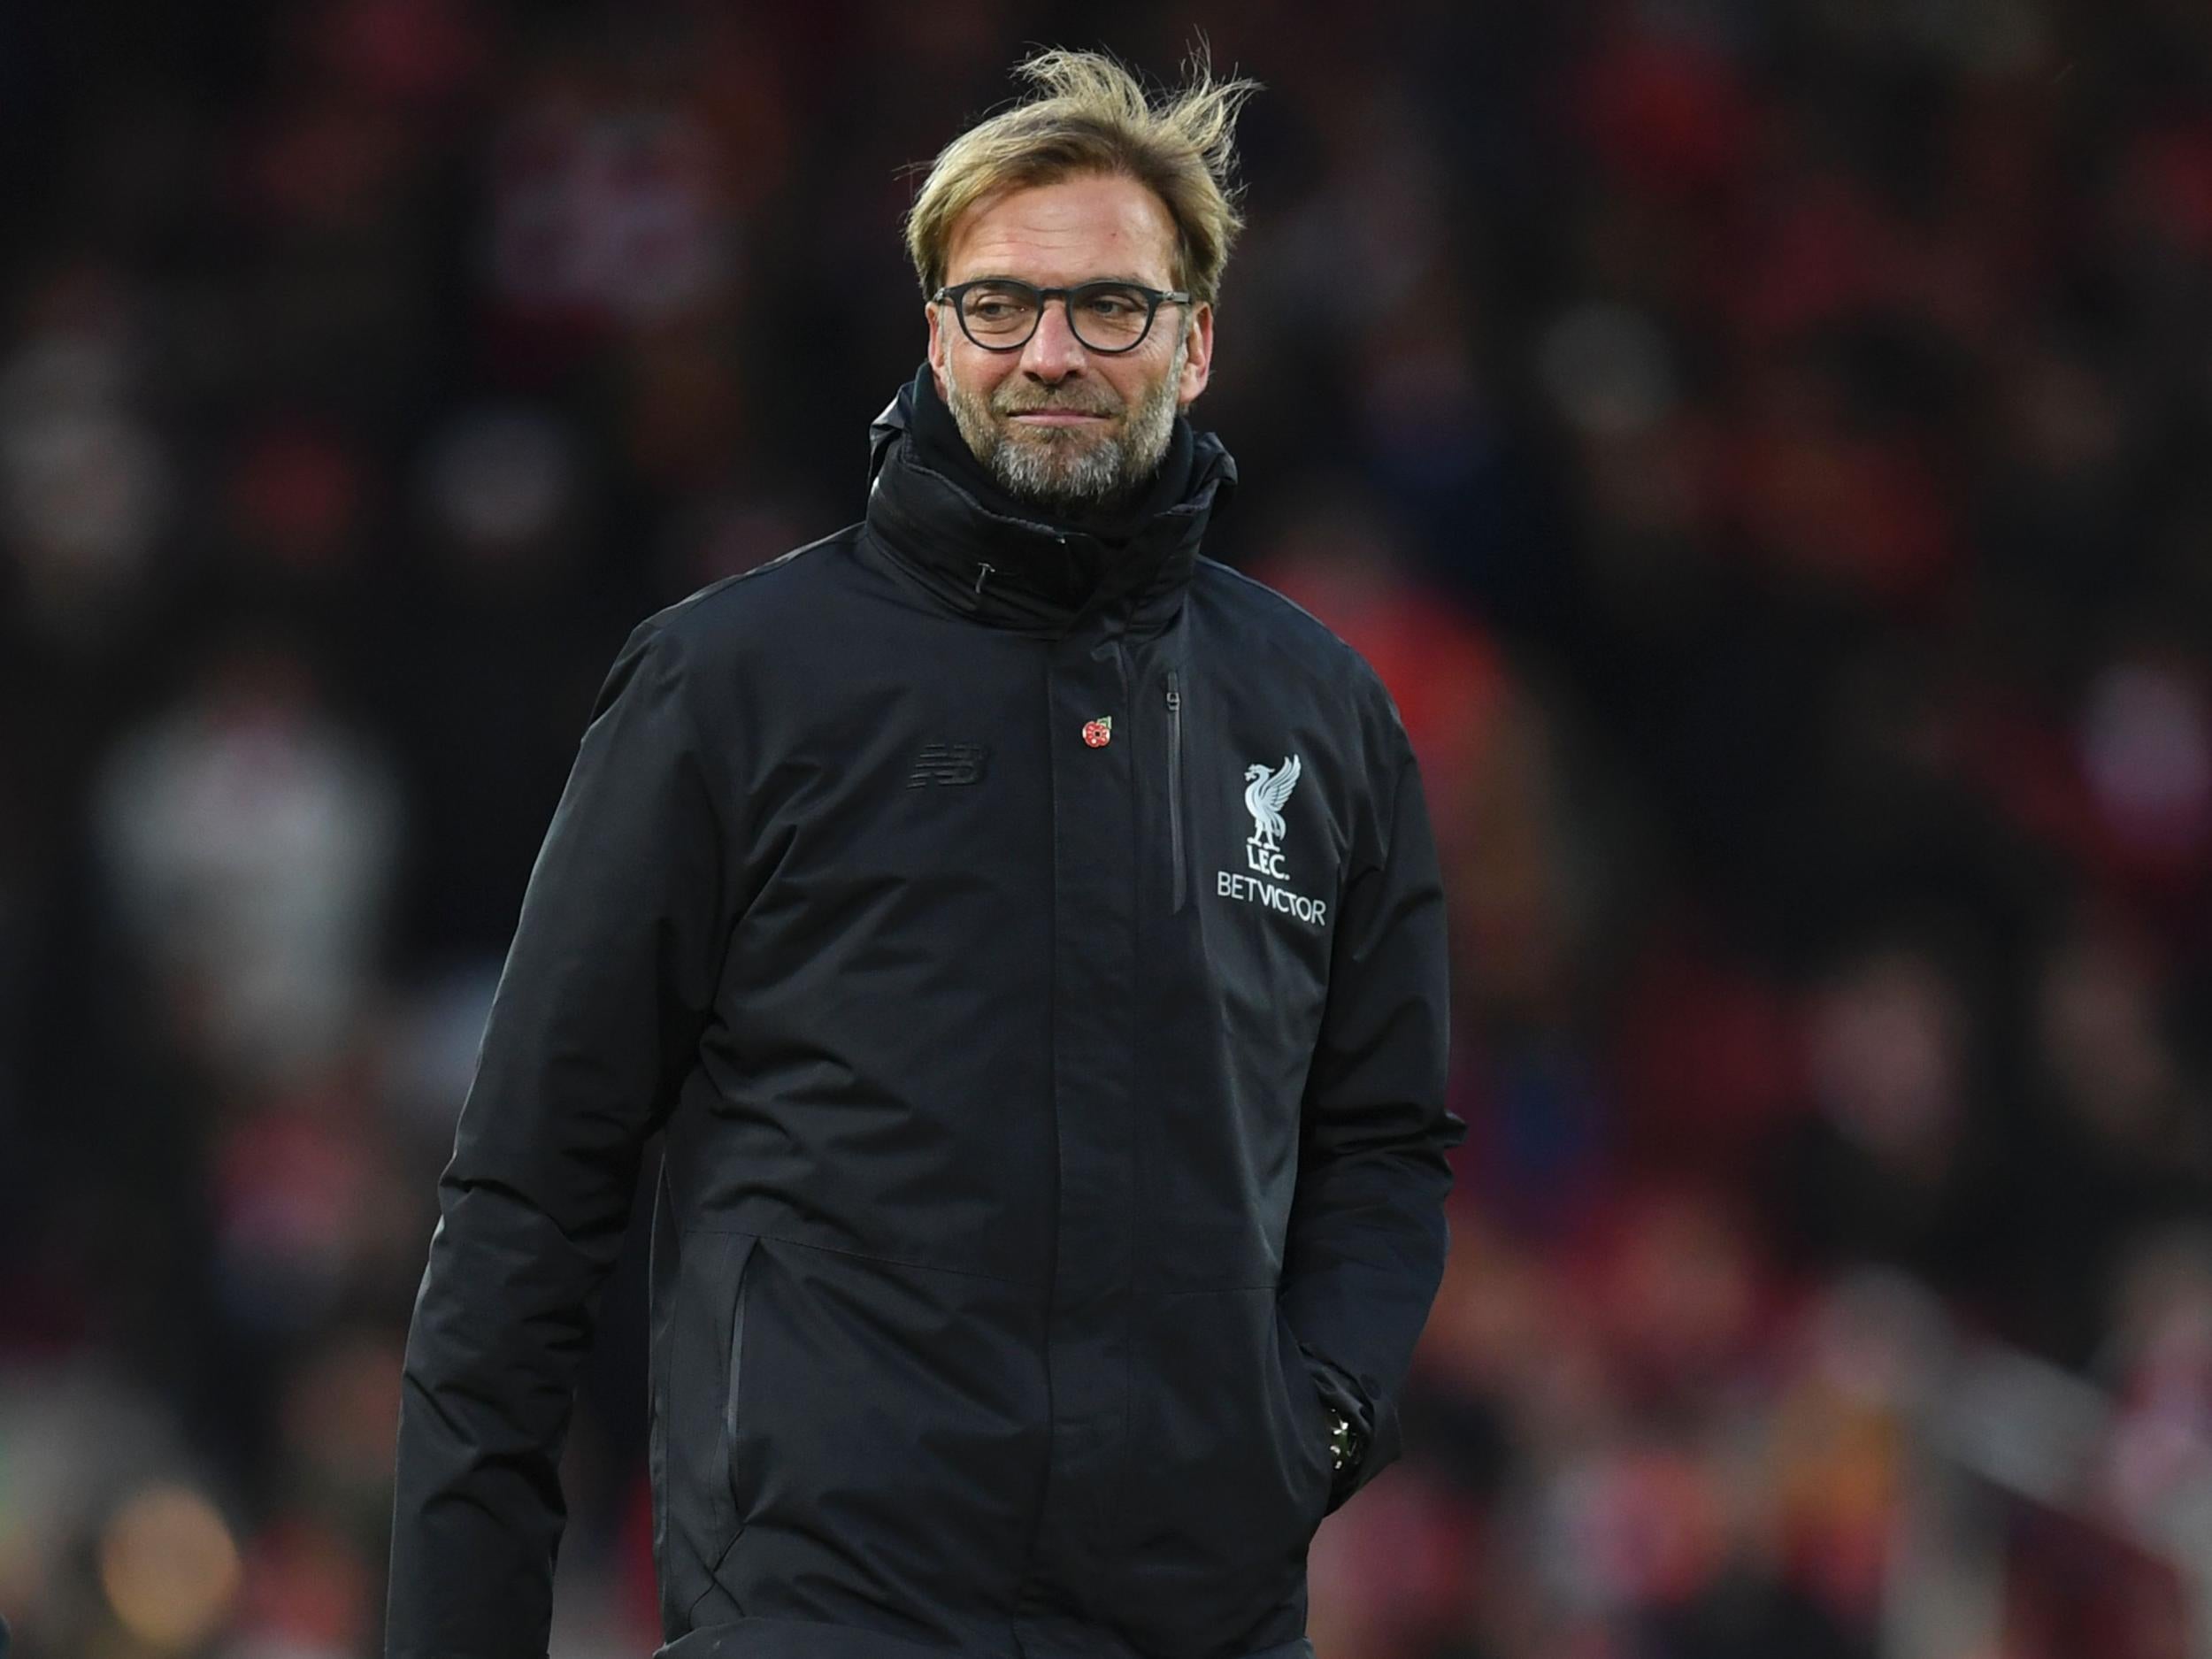 Klopp said he wasn't expecting the decision to be reversed